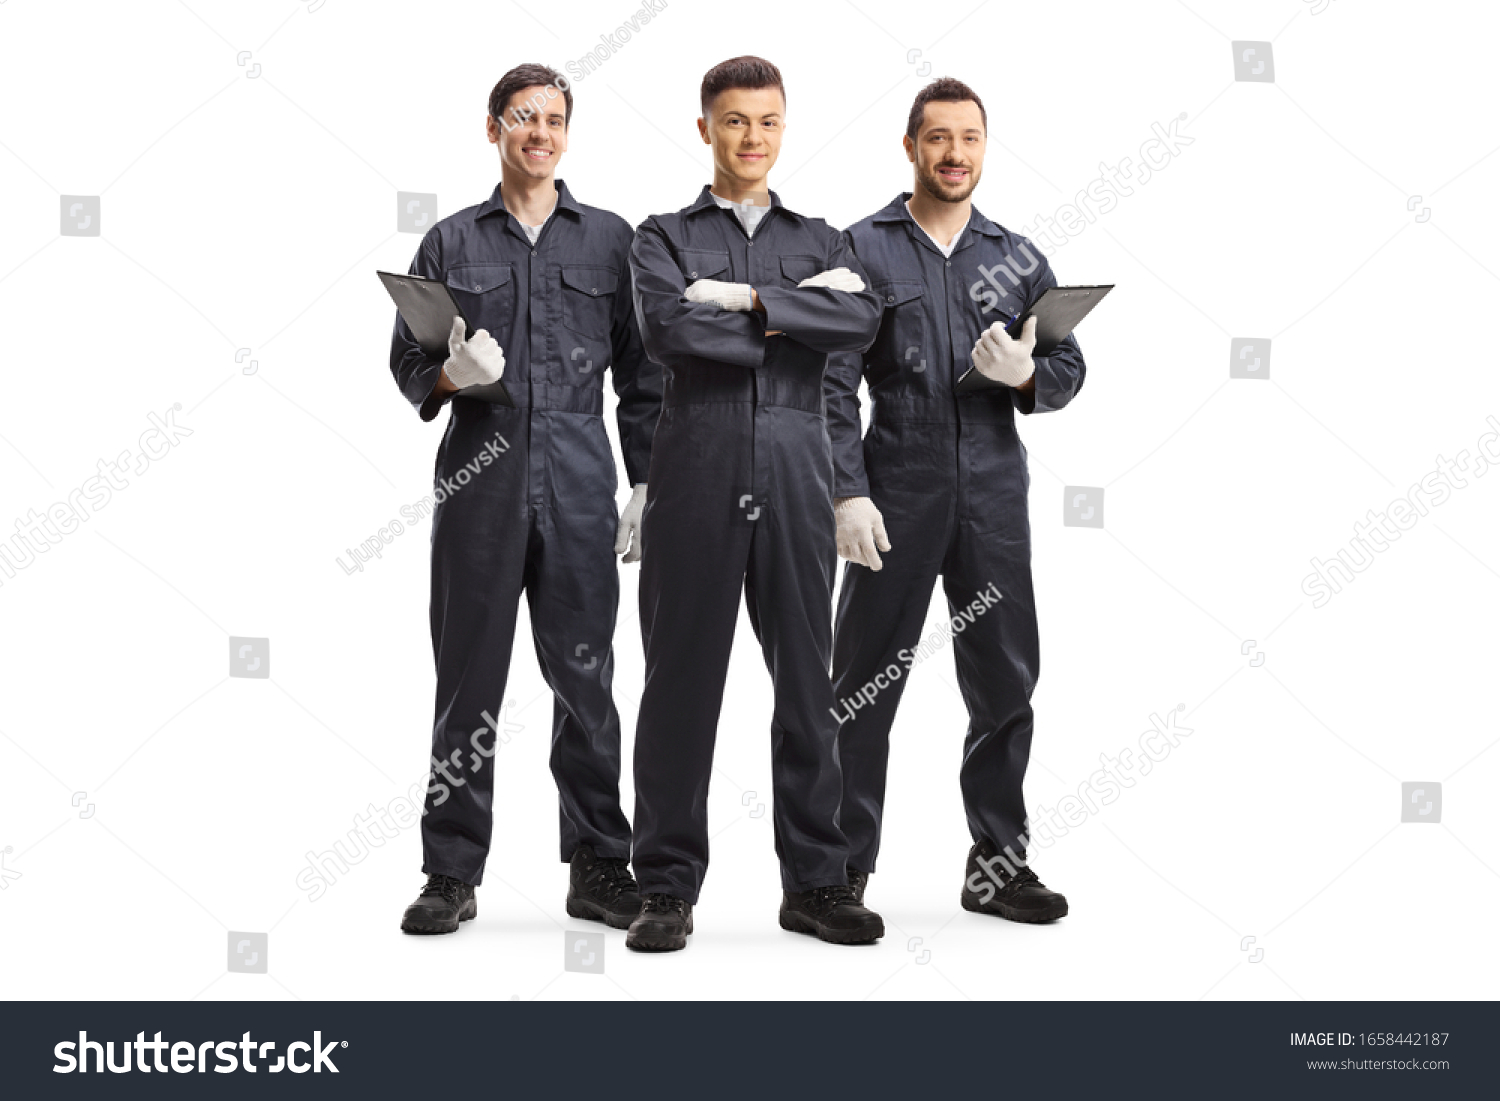 Full length portrait of three mechanic workers in uniforms isolated on white background #1658442187